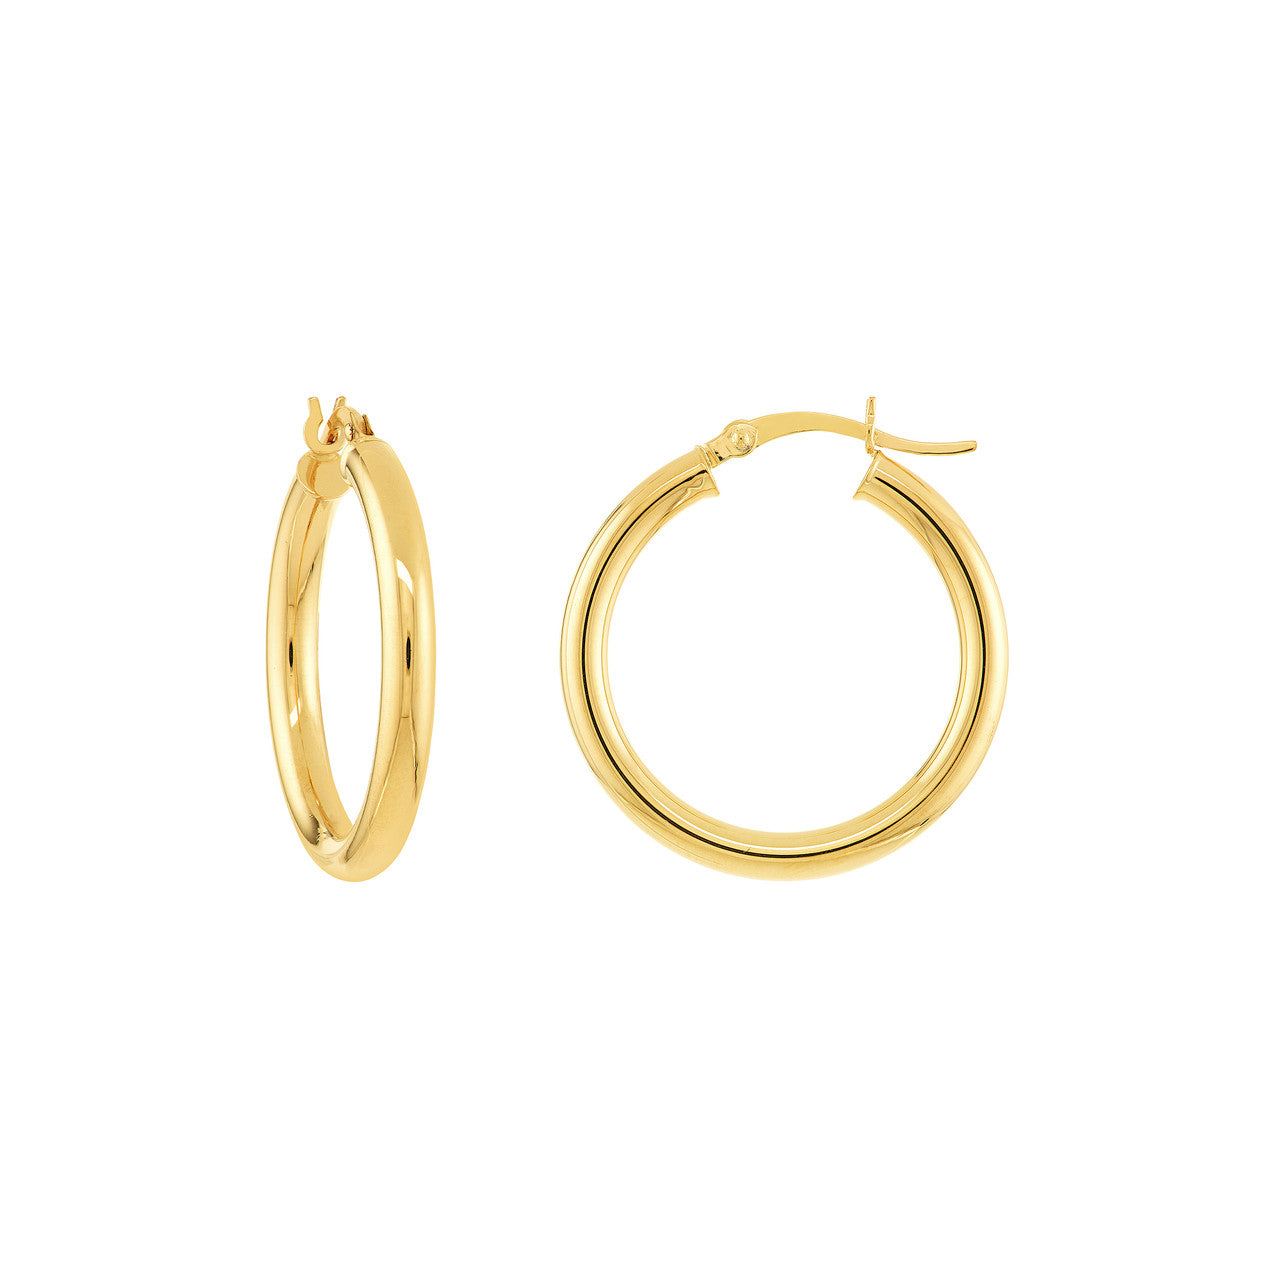 14K Gold Hoop Earrings 2 x 15 MM (Small Size) – QUEEN MAY